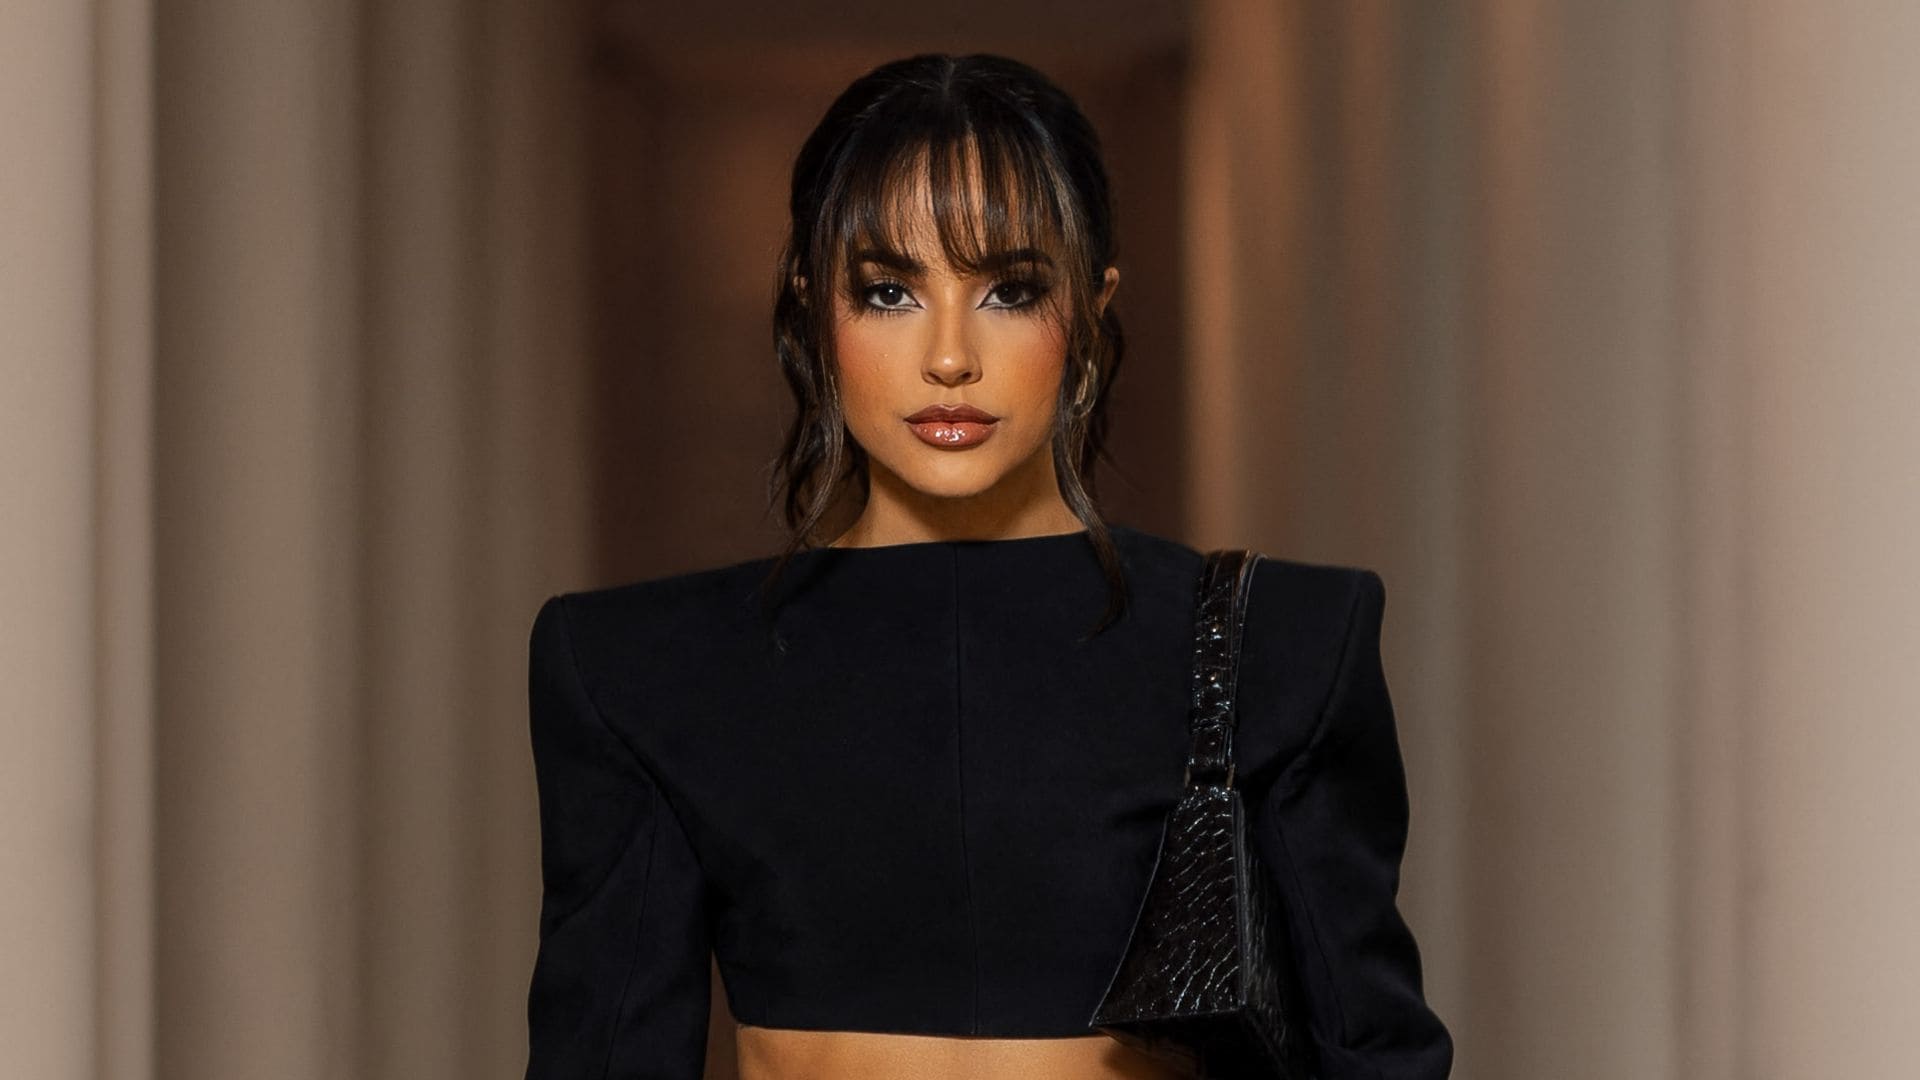 Becky G stuns in show-stopping looks at Paris's fashion event